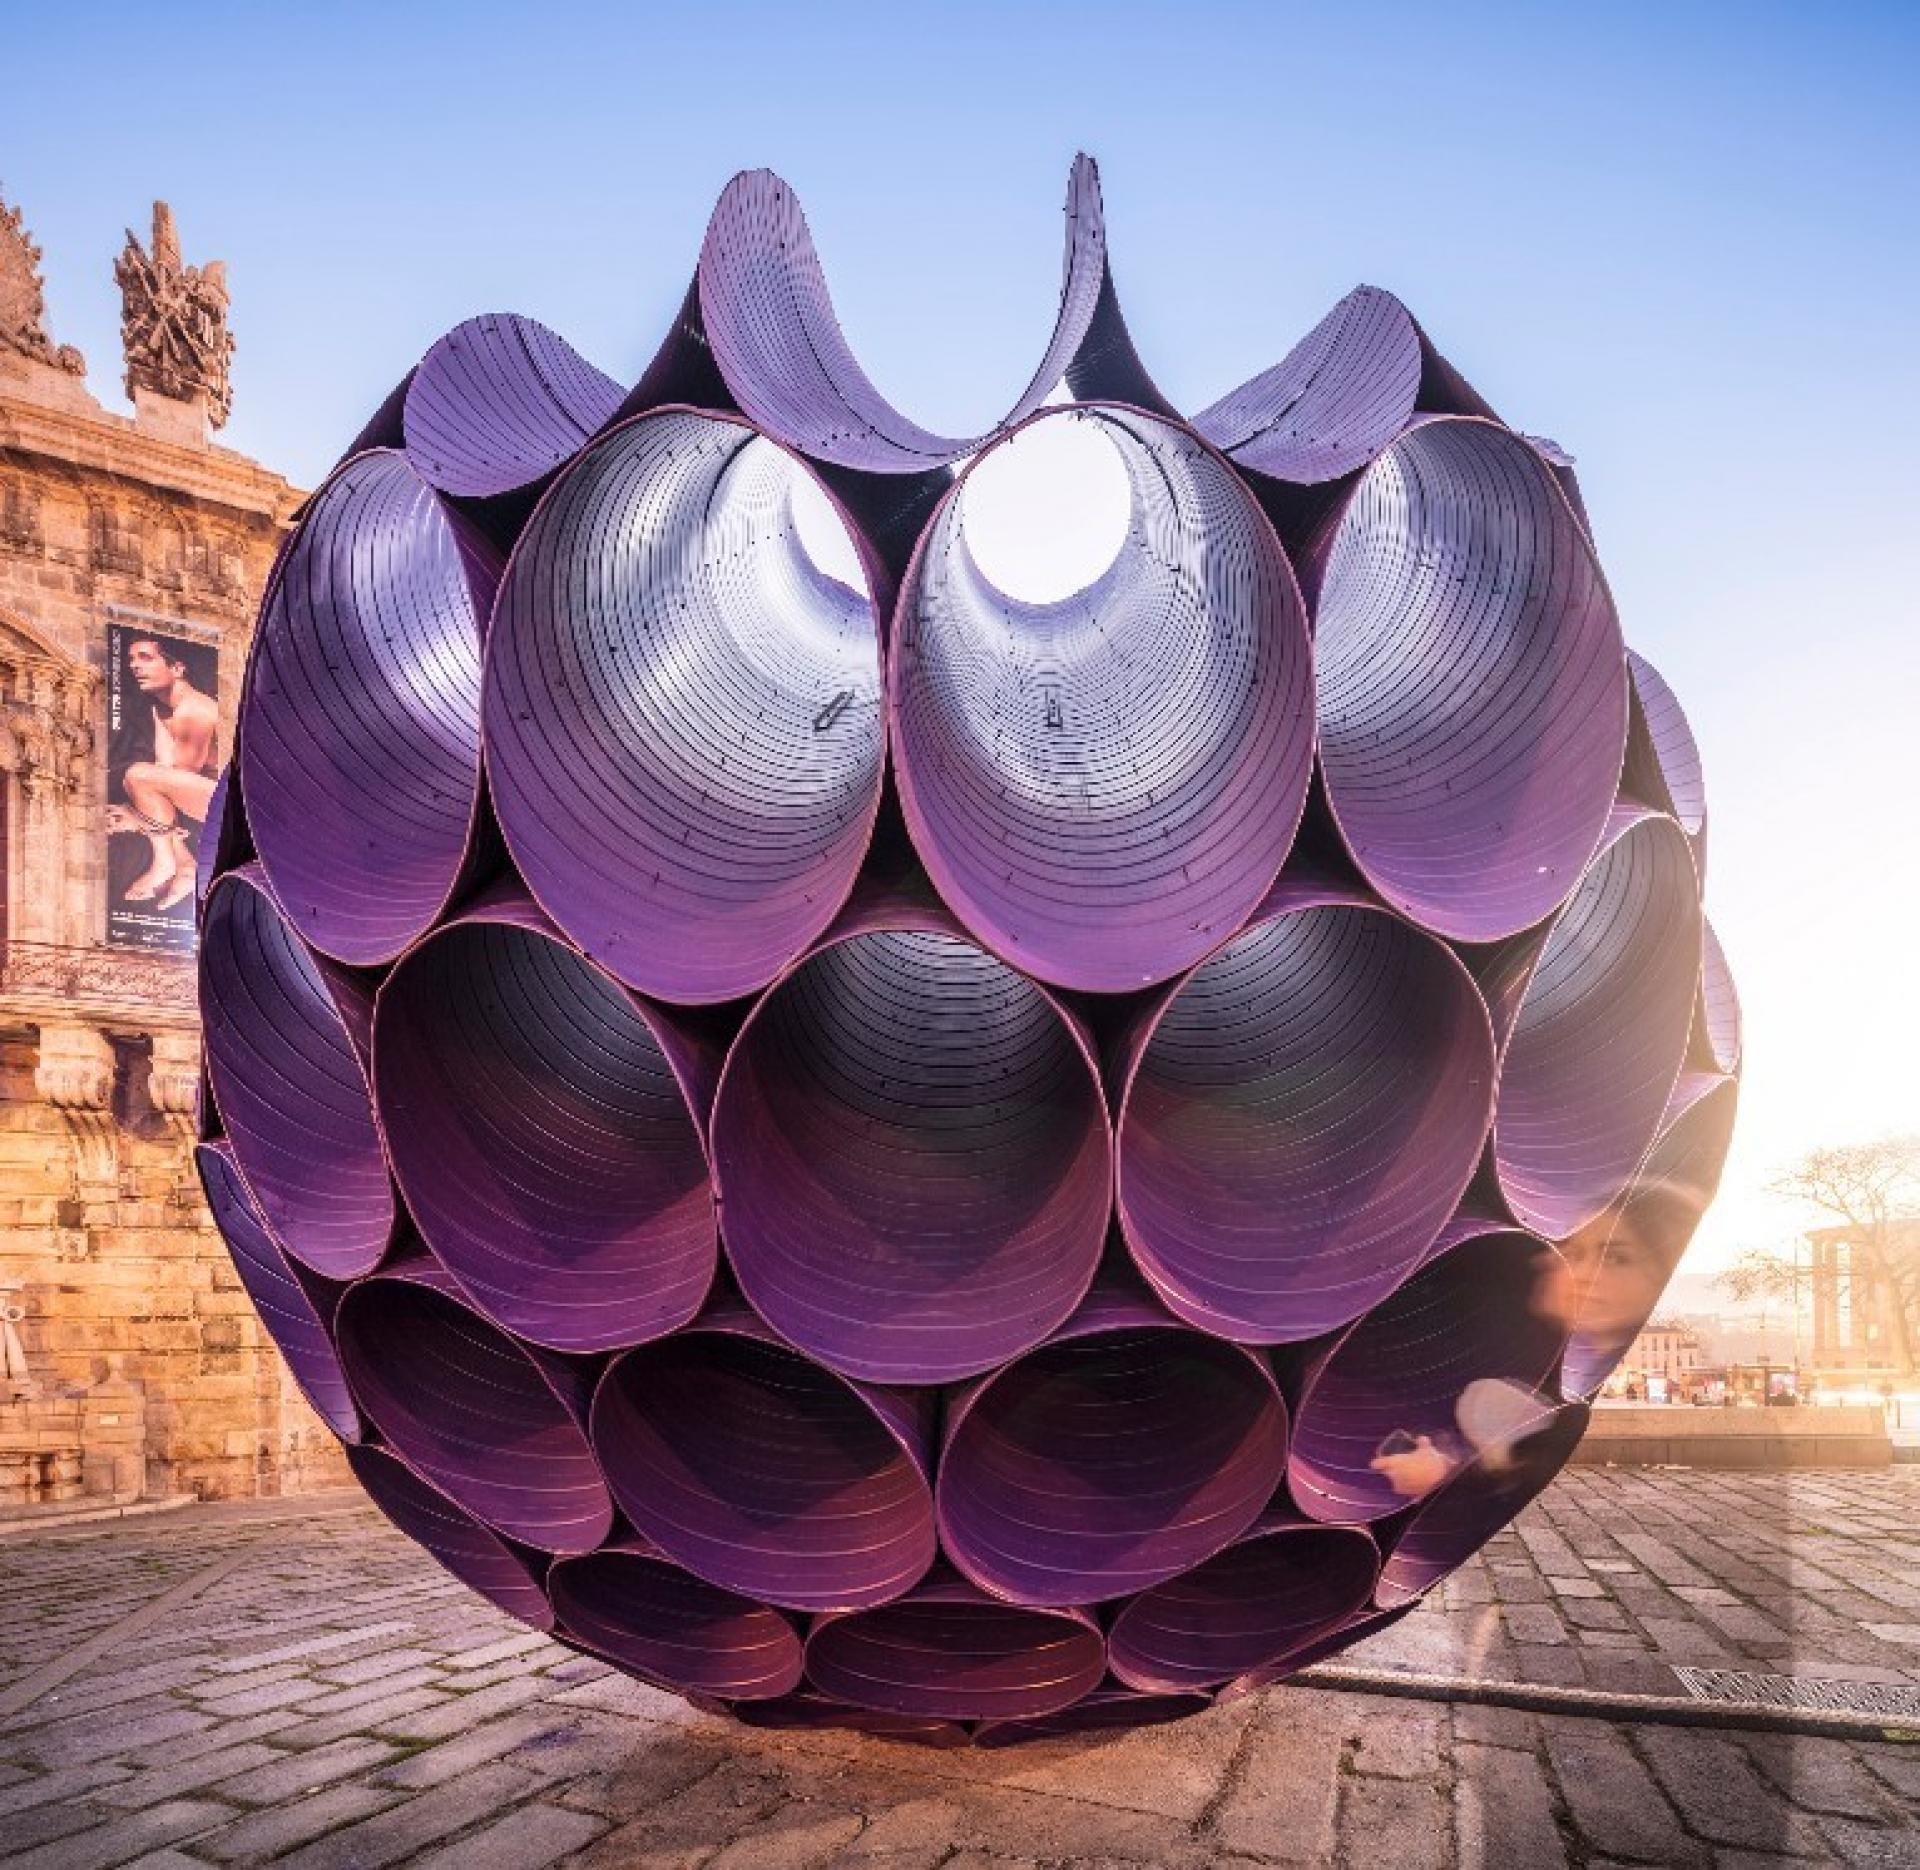 Eclipse: the new center of gravity in the old town of Porto. | Photo via Archilovers